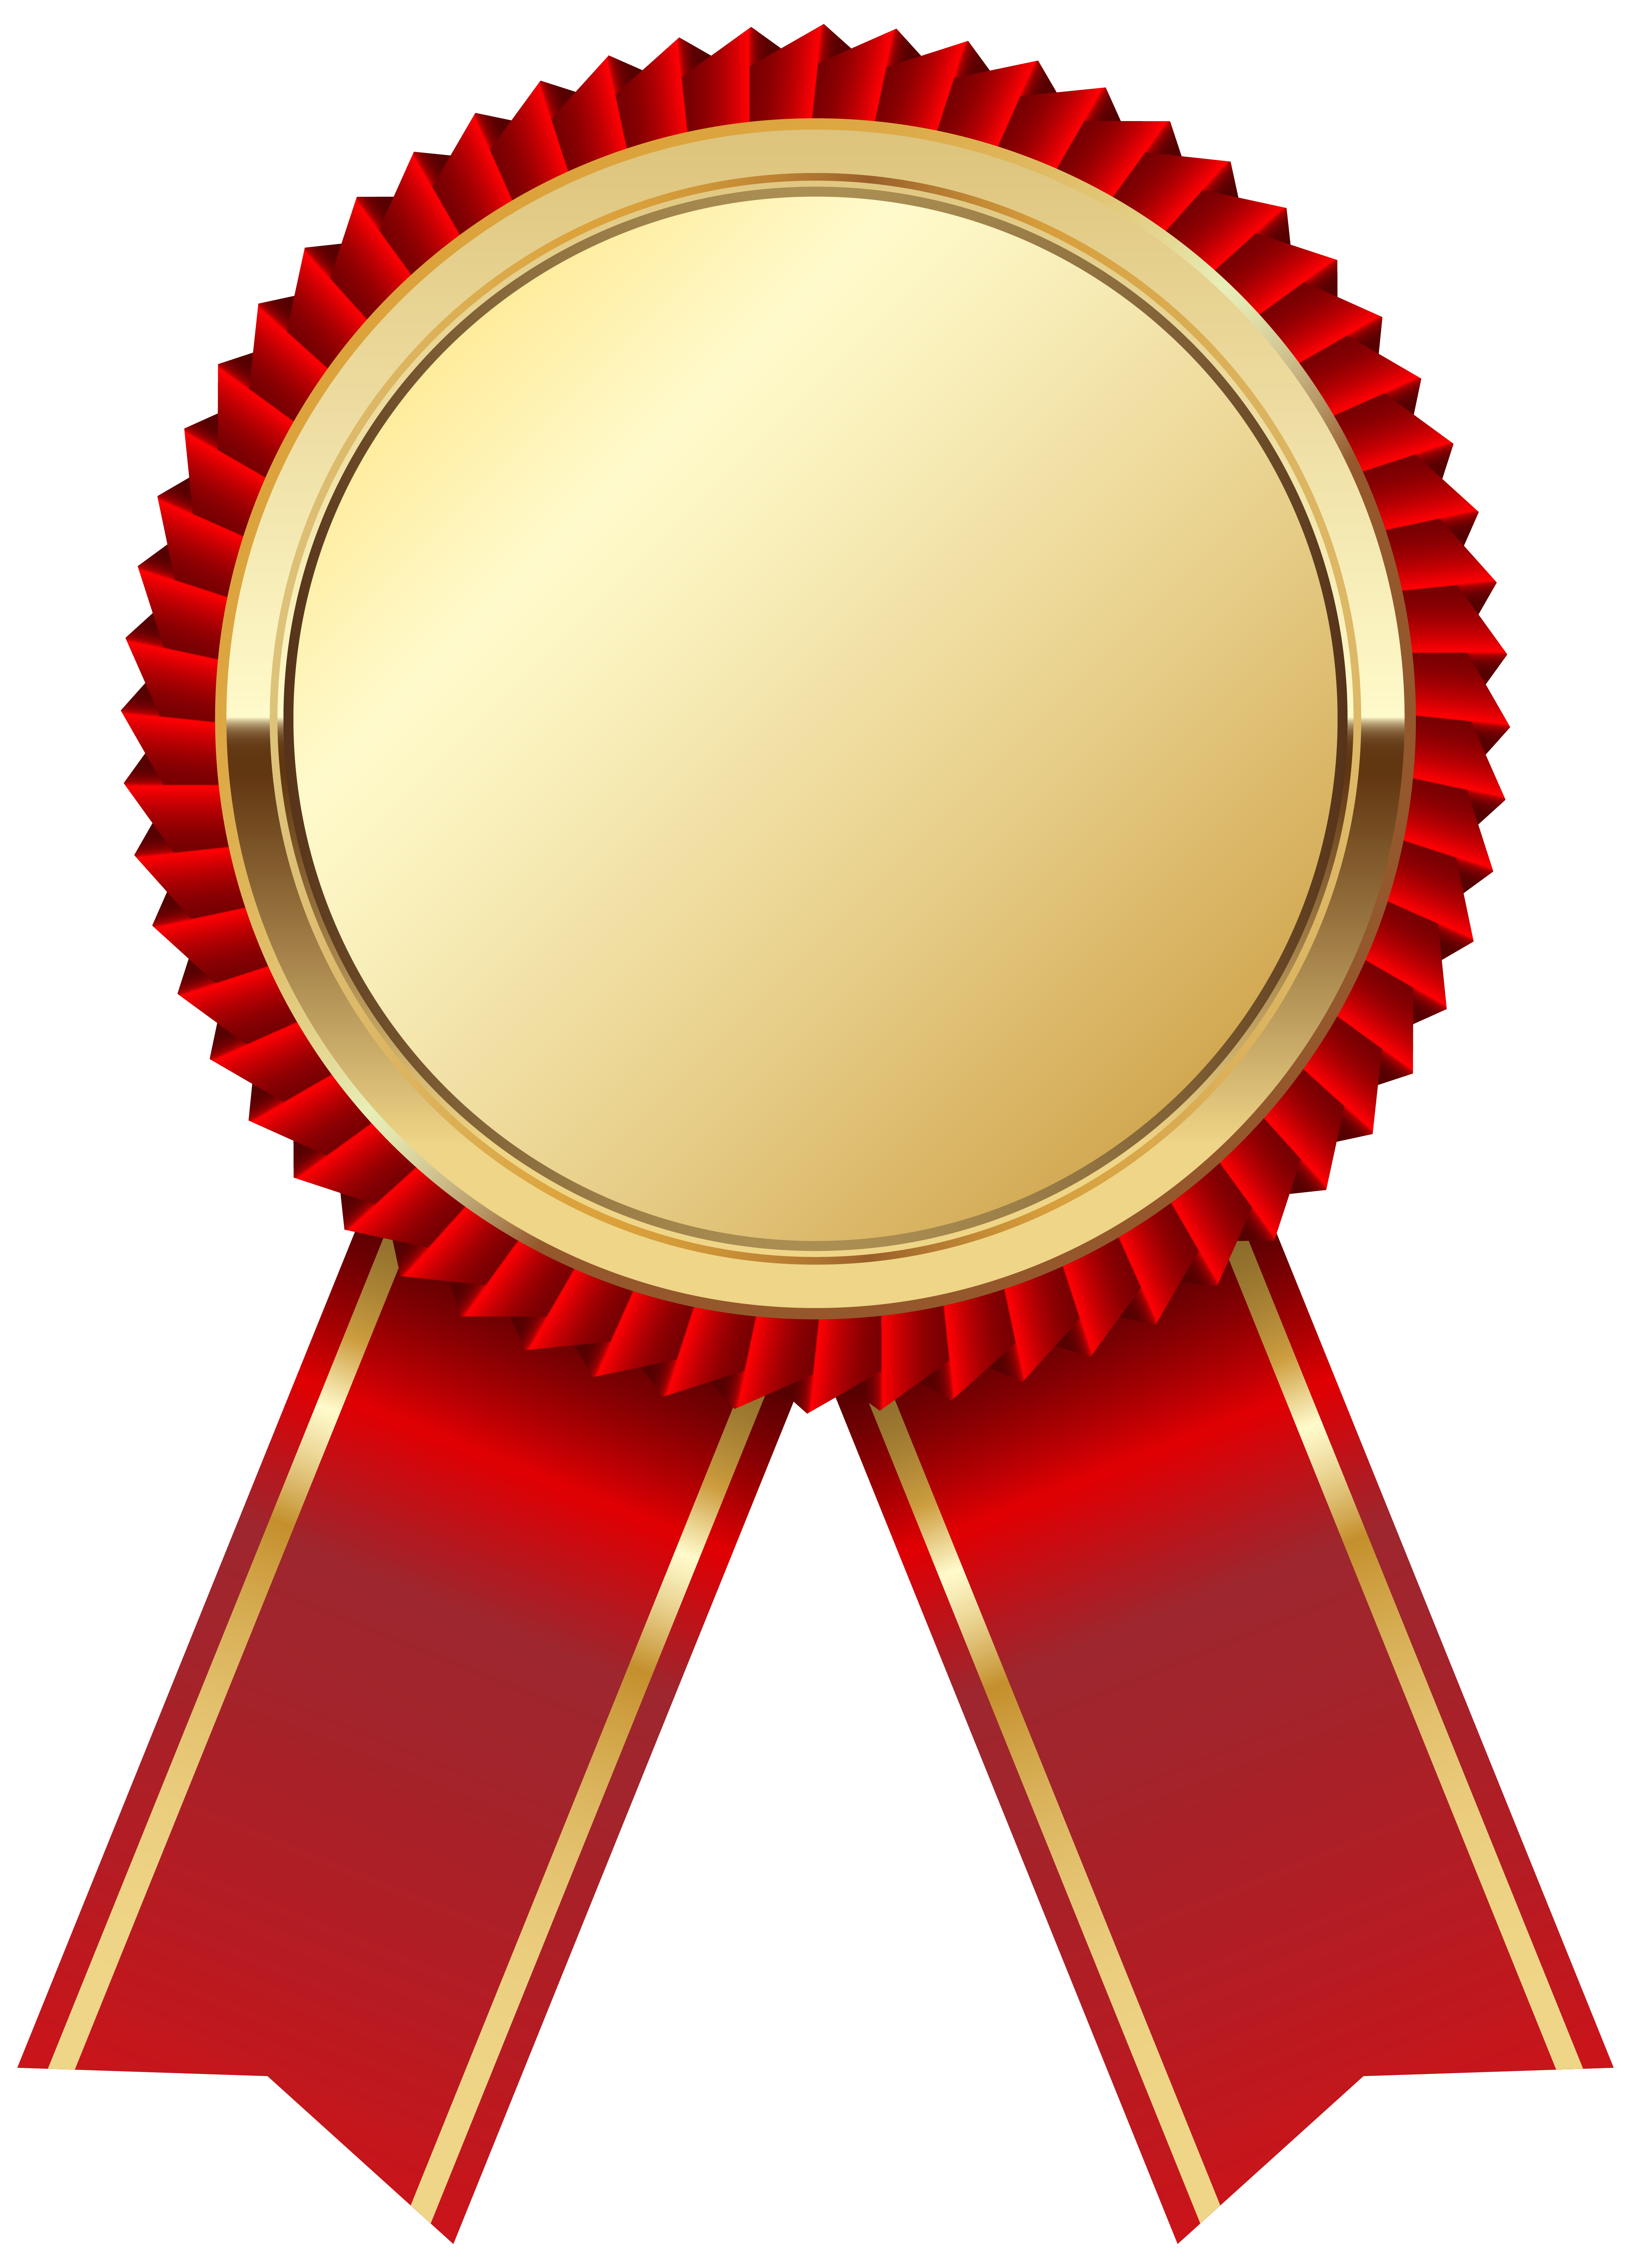 gold medals clipart - photo #34